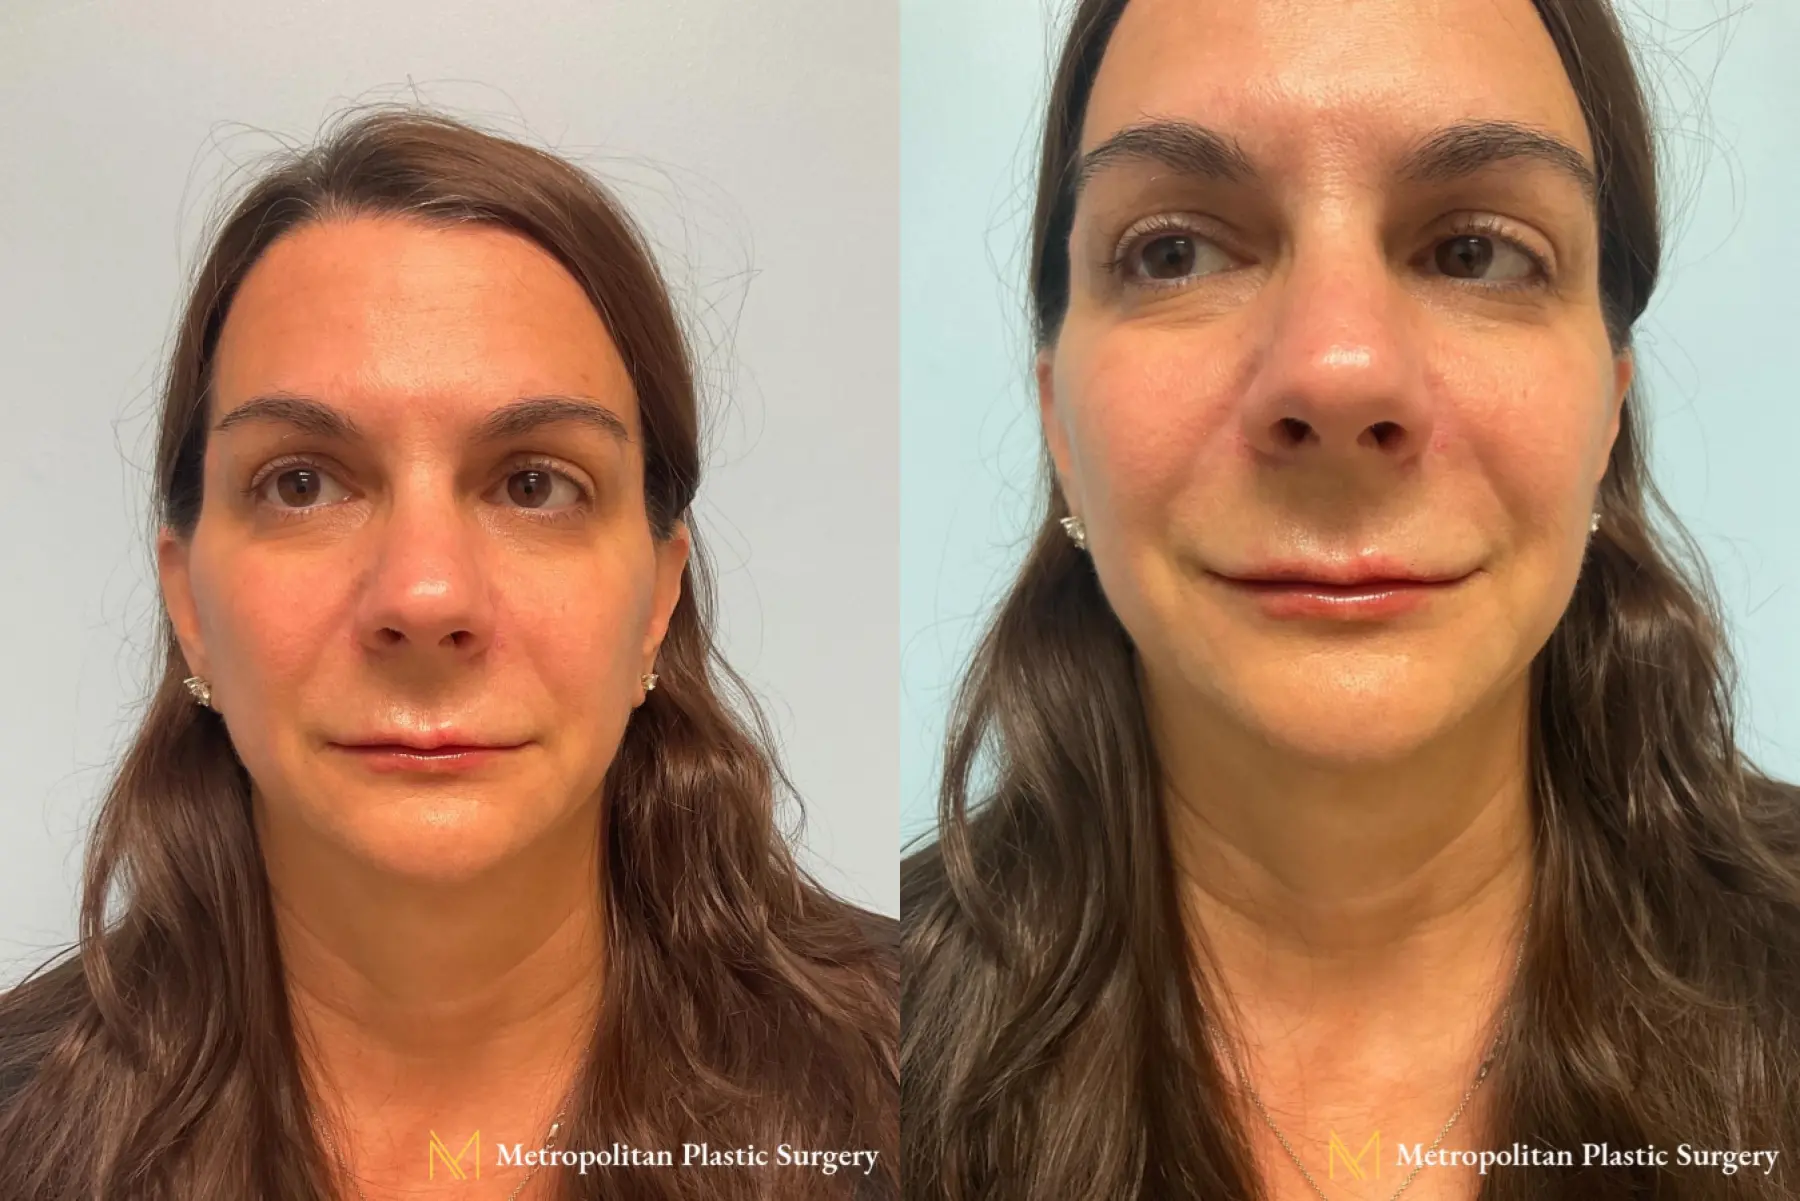 Radiesse Volumizing Filler to Take Lines and Wrinkles Away - Before and After